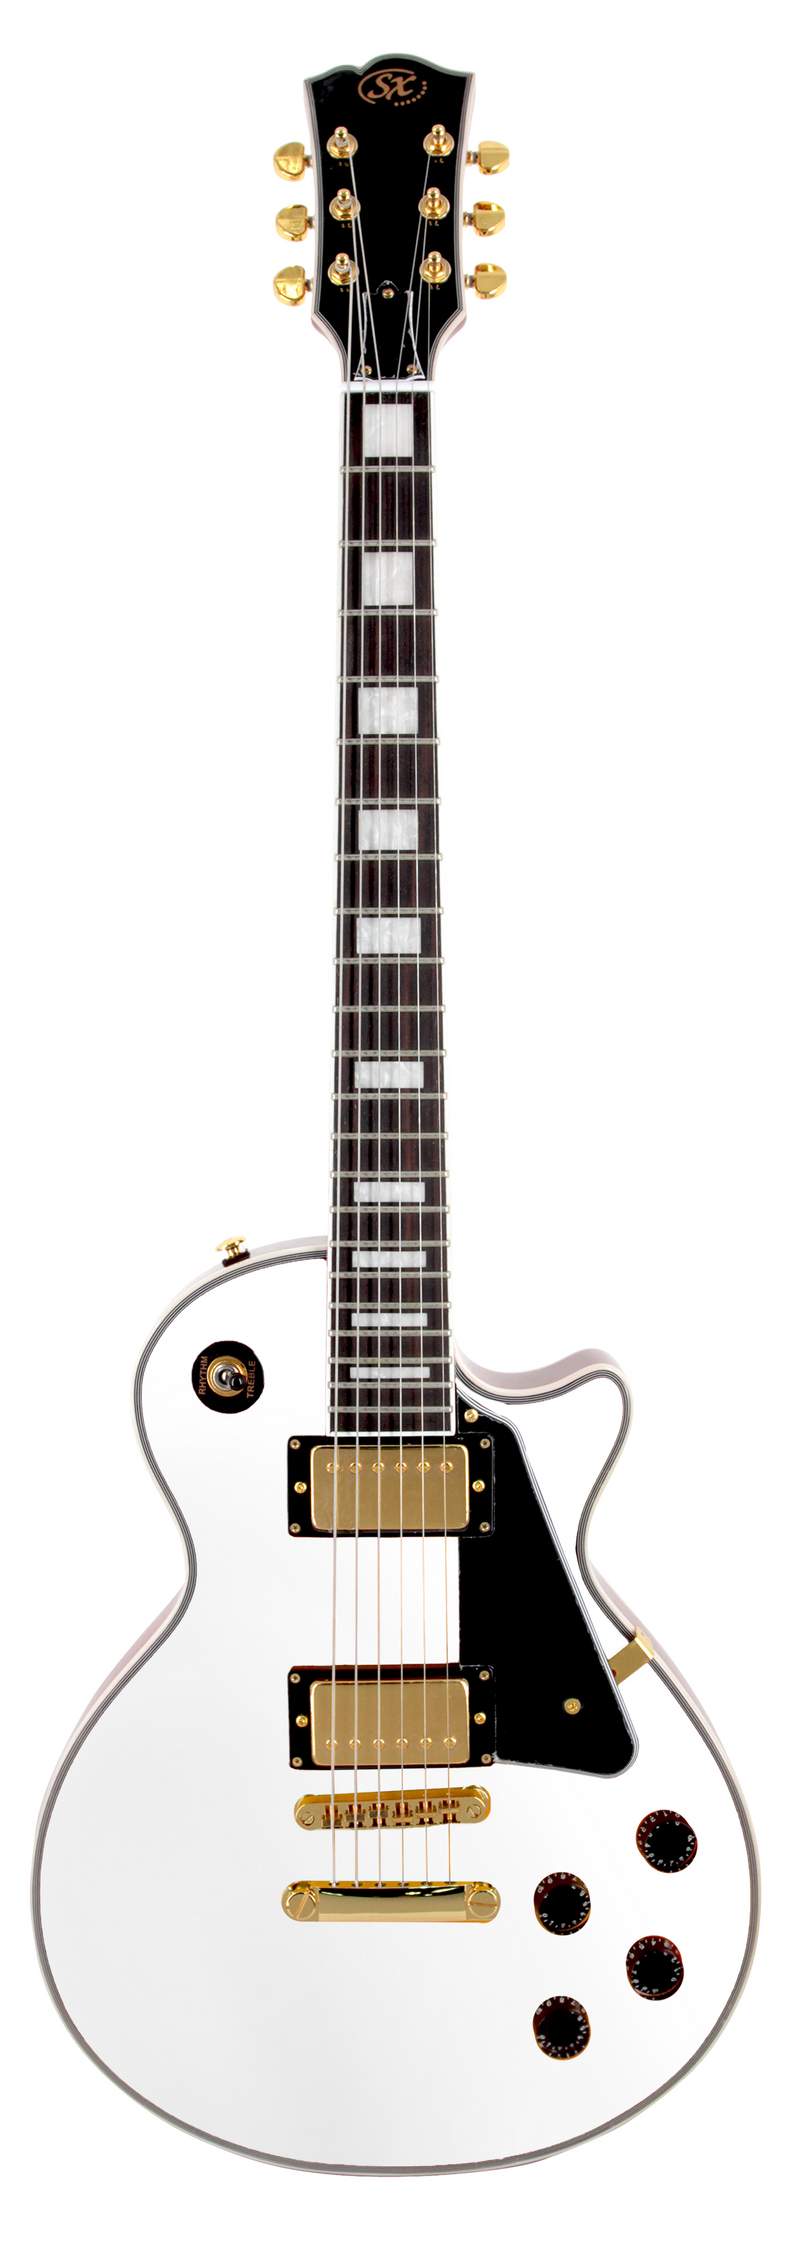 SX Deluxe LP Style Electric Guitar.